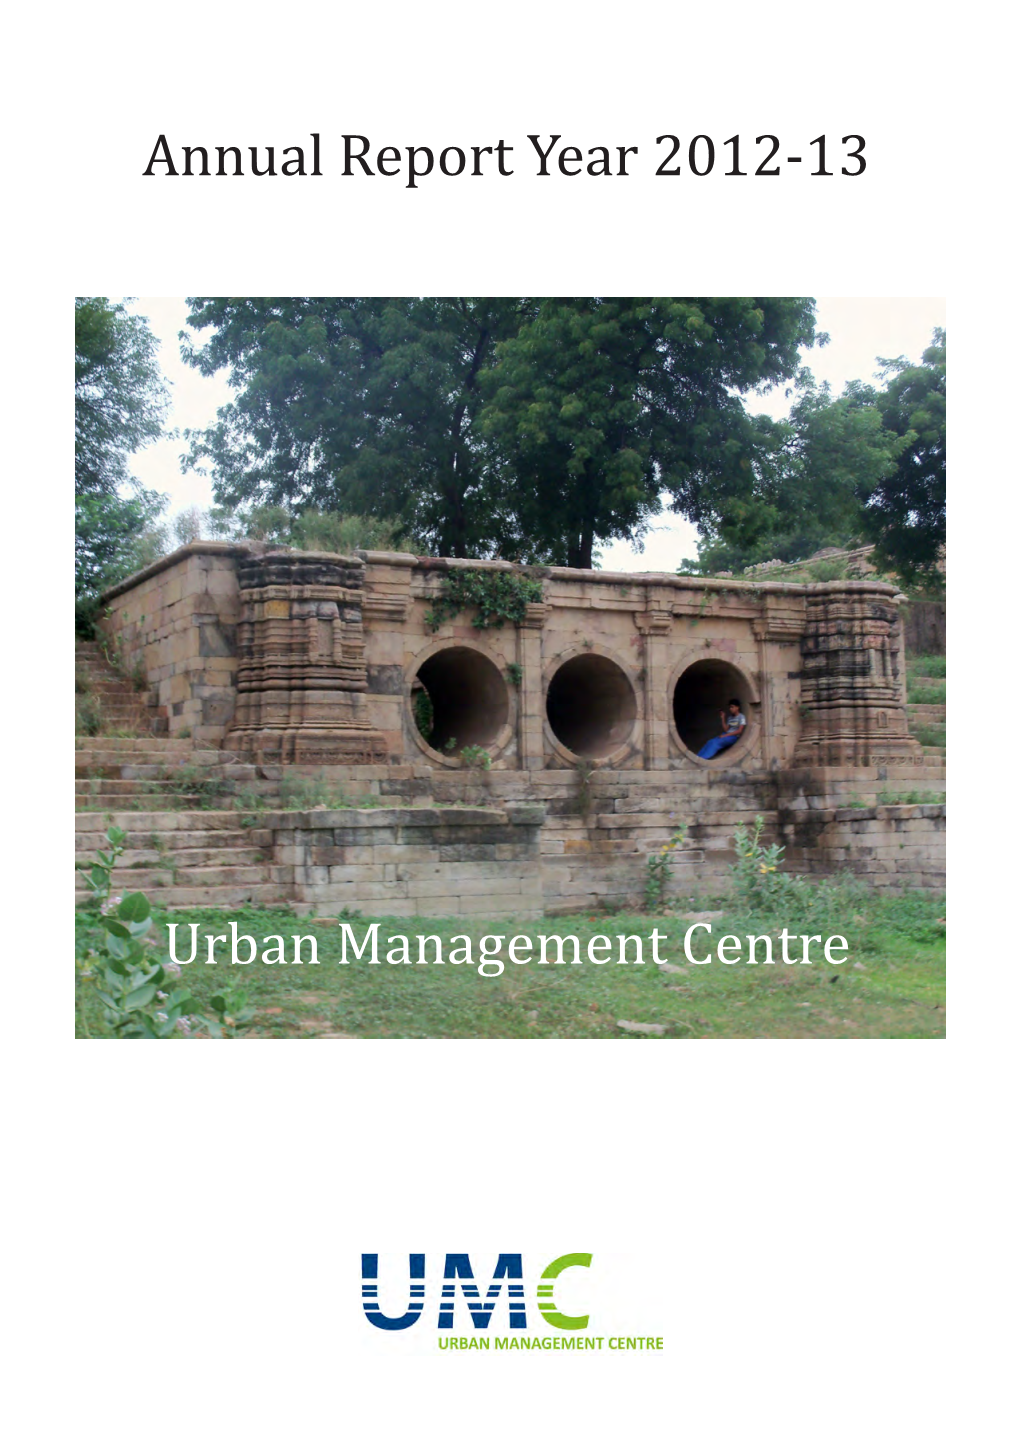 Annual Report Year 2012-13 Urban Management Centre